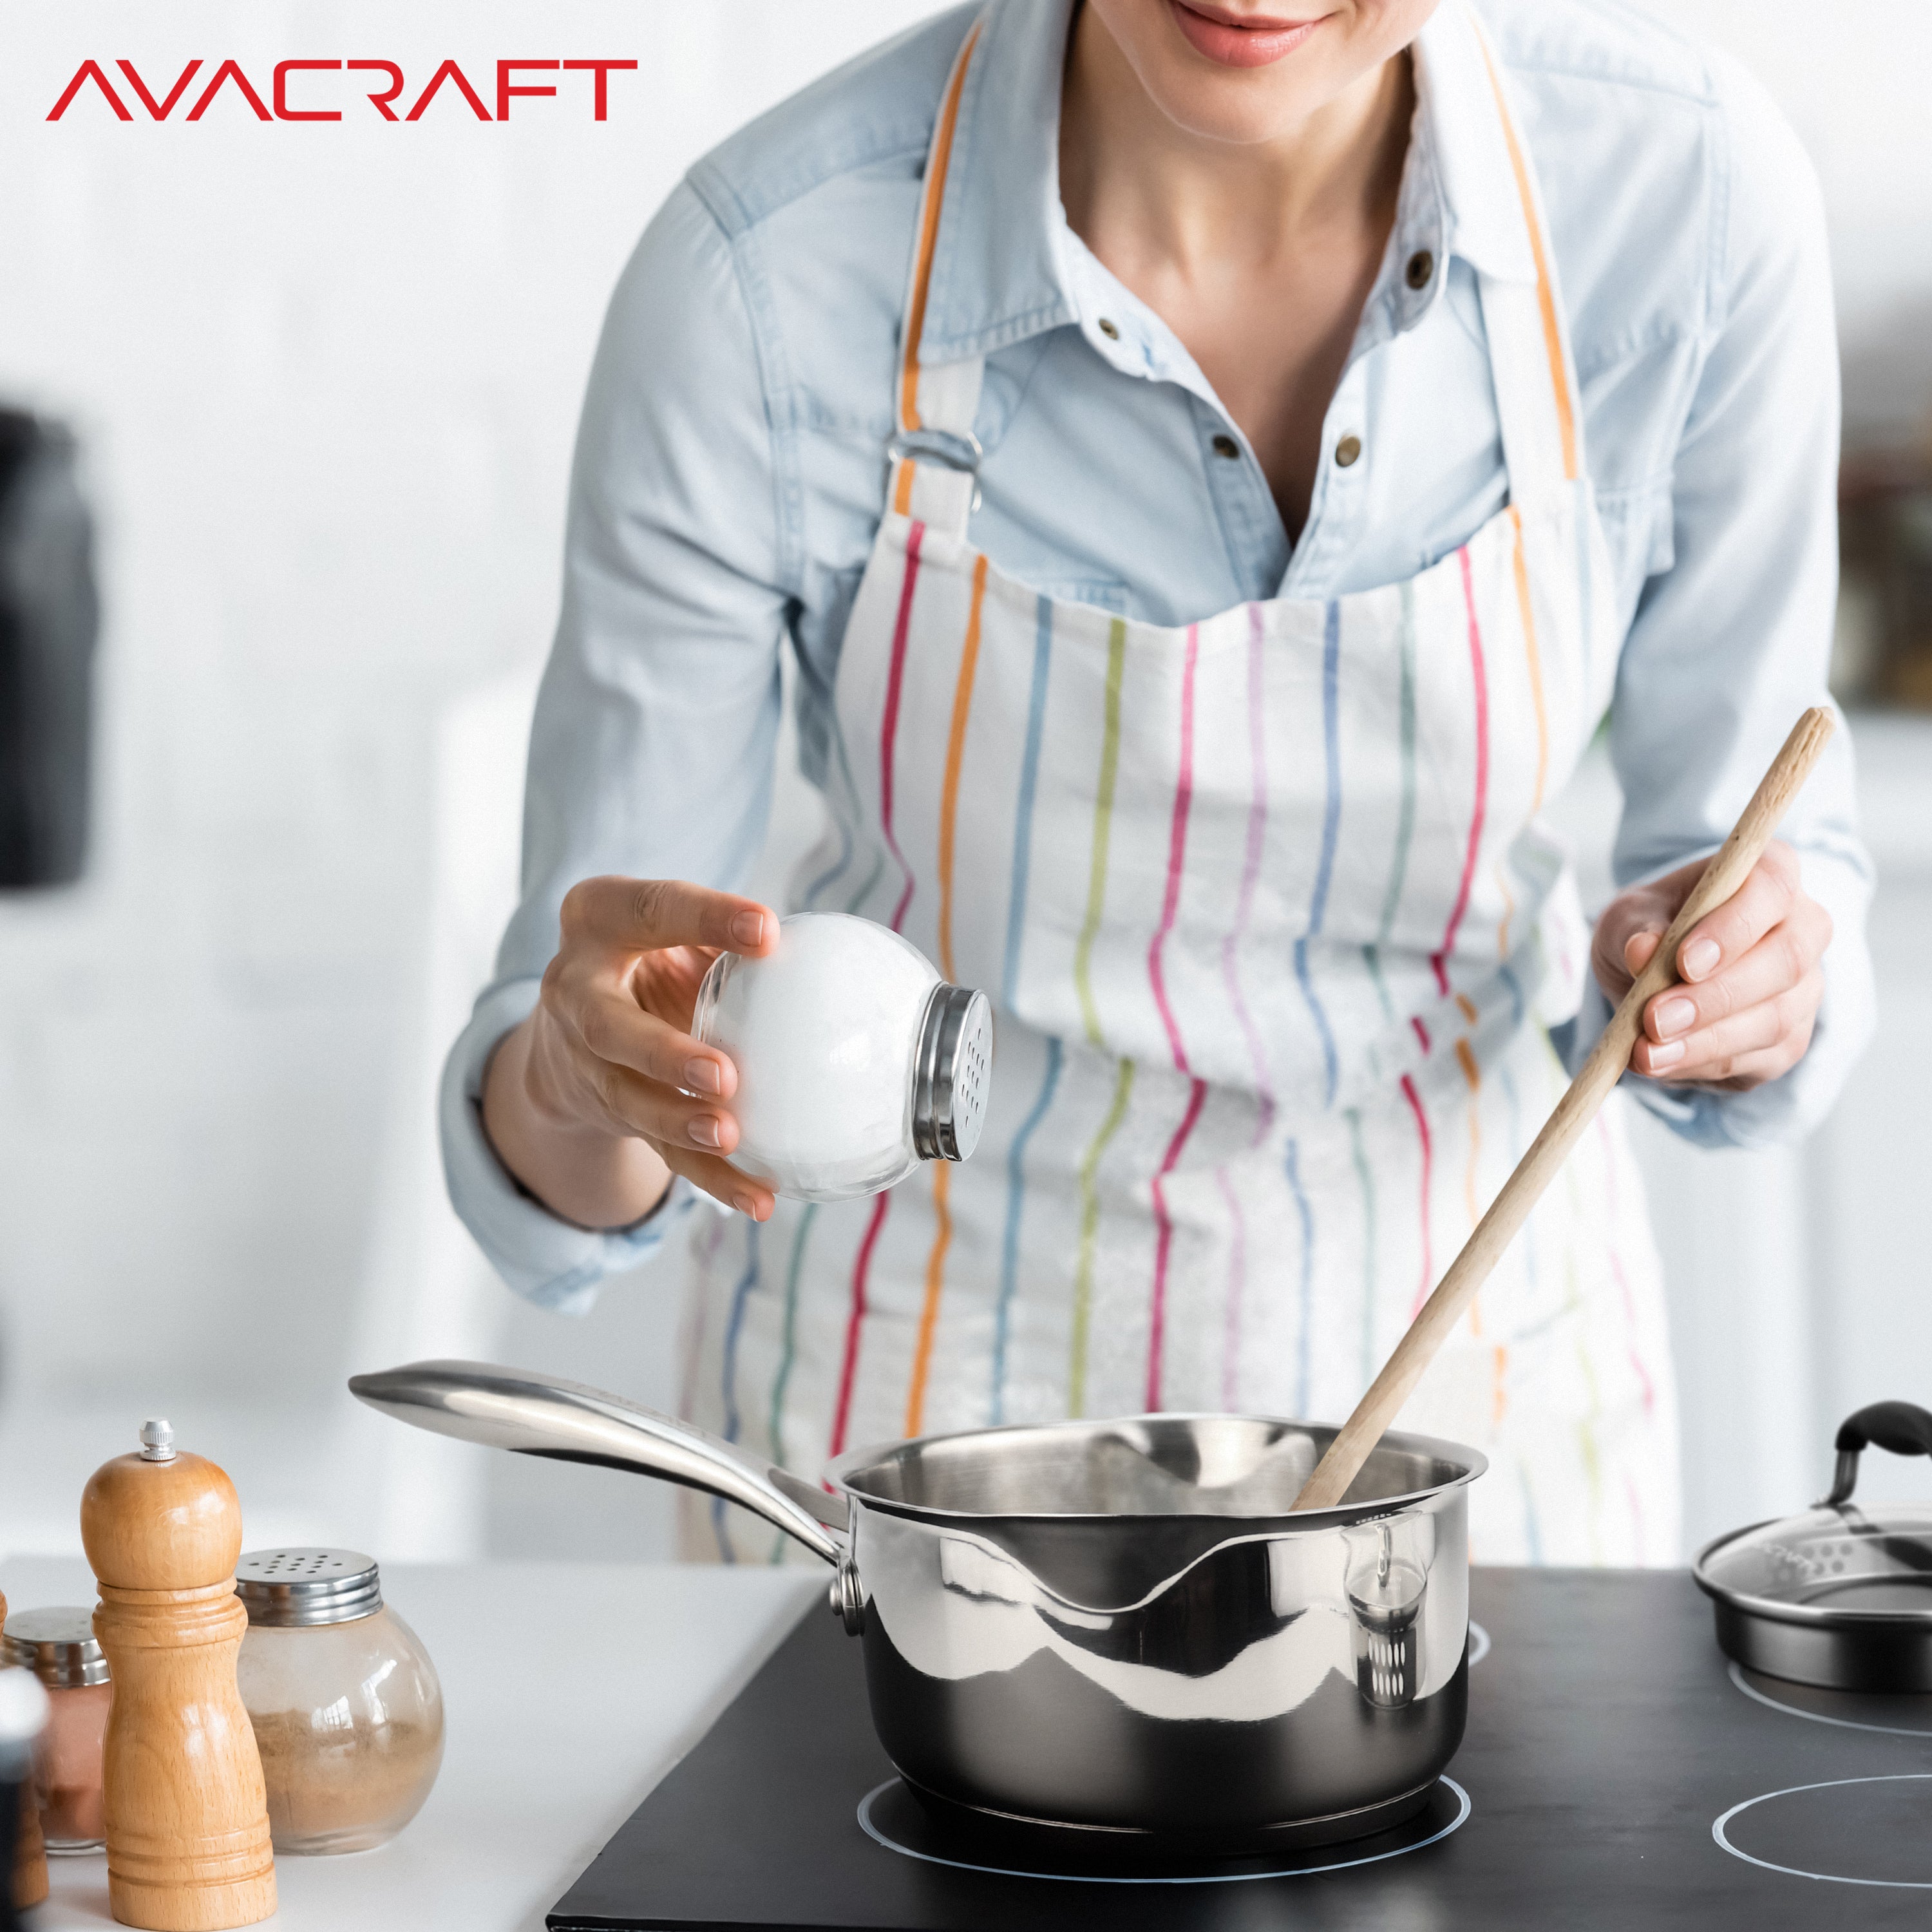  AVACRAFT Stainless Steel Saucepan with Glass Strainer Lid, Two  Side Spouts for Easy Pour with Ergonomic Handle, Multipurpose Sauce Pot  (Tri-Ply Capsule Bottom, 2.5 Quart): Home & Kitchen